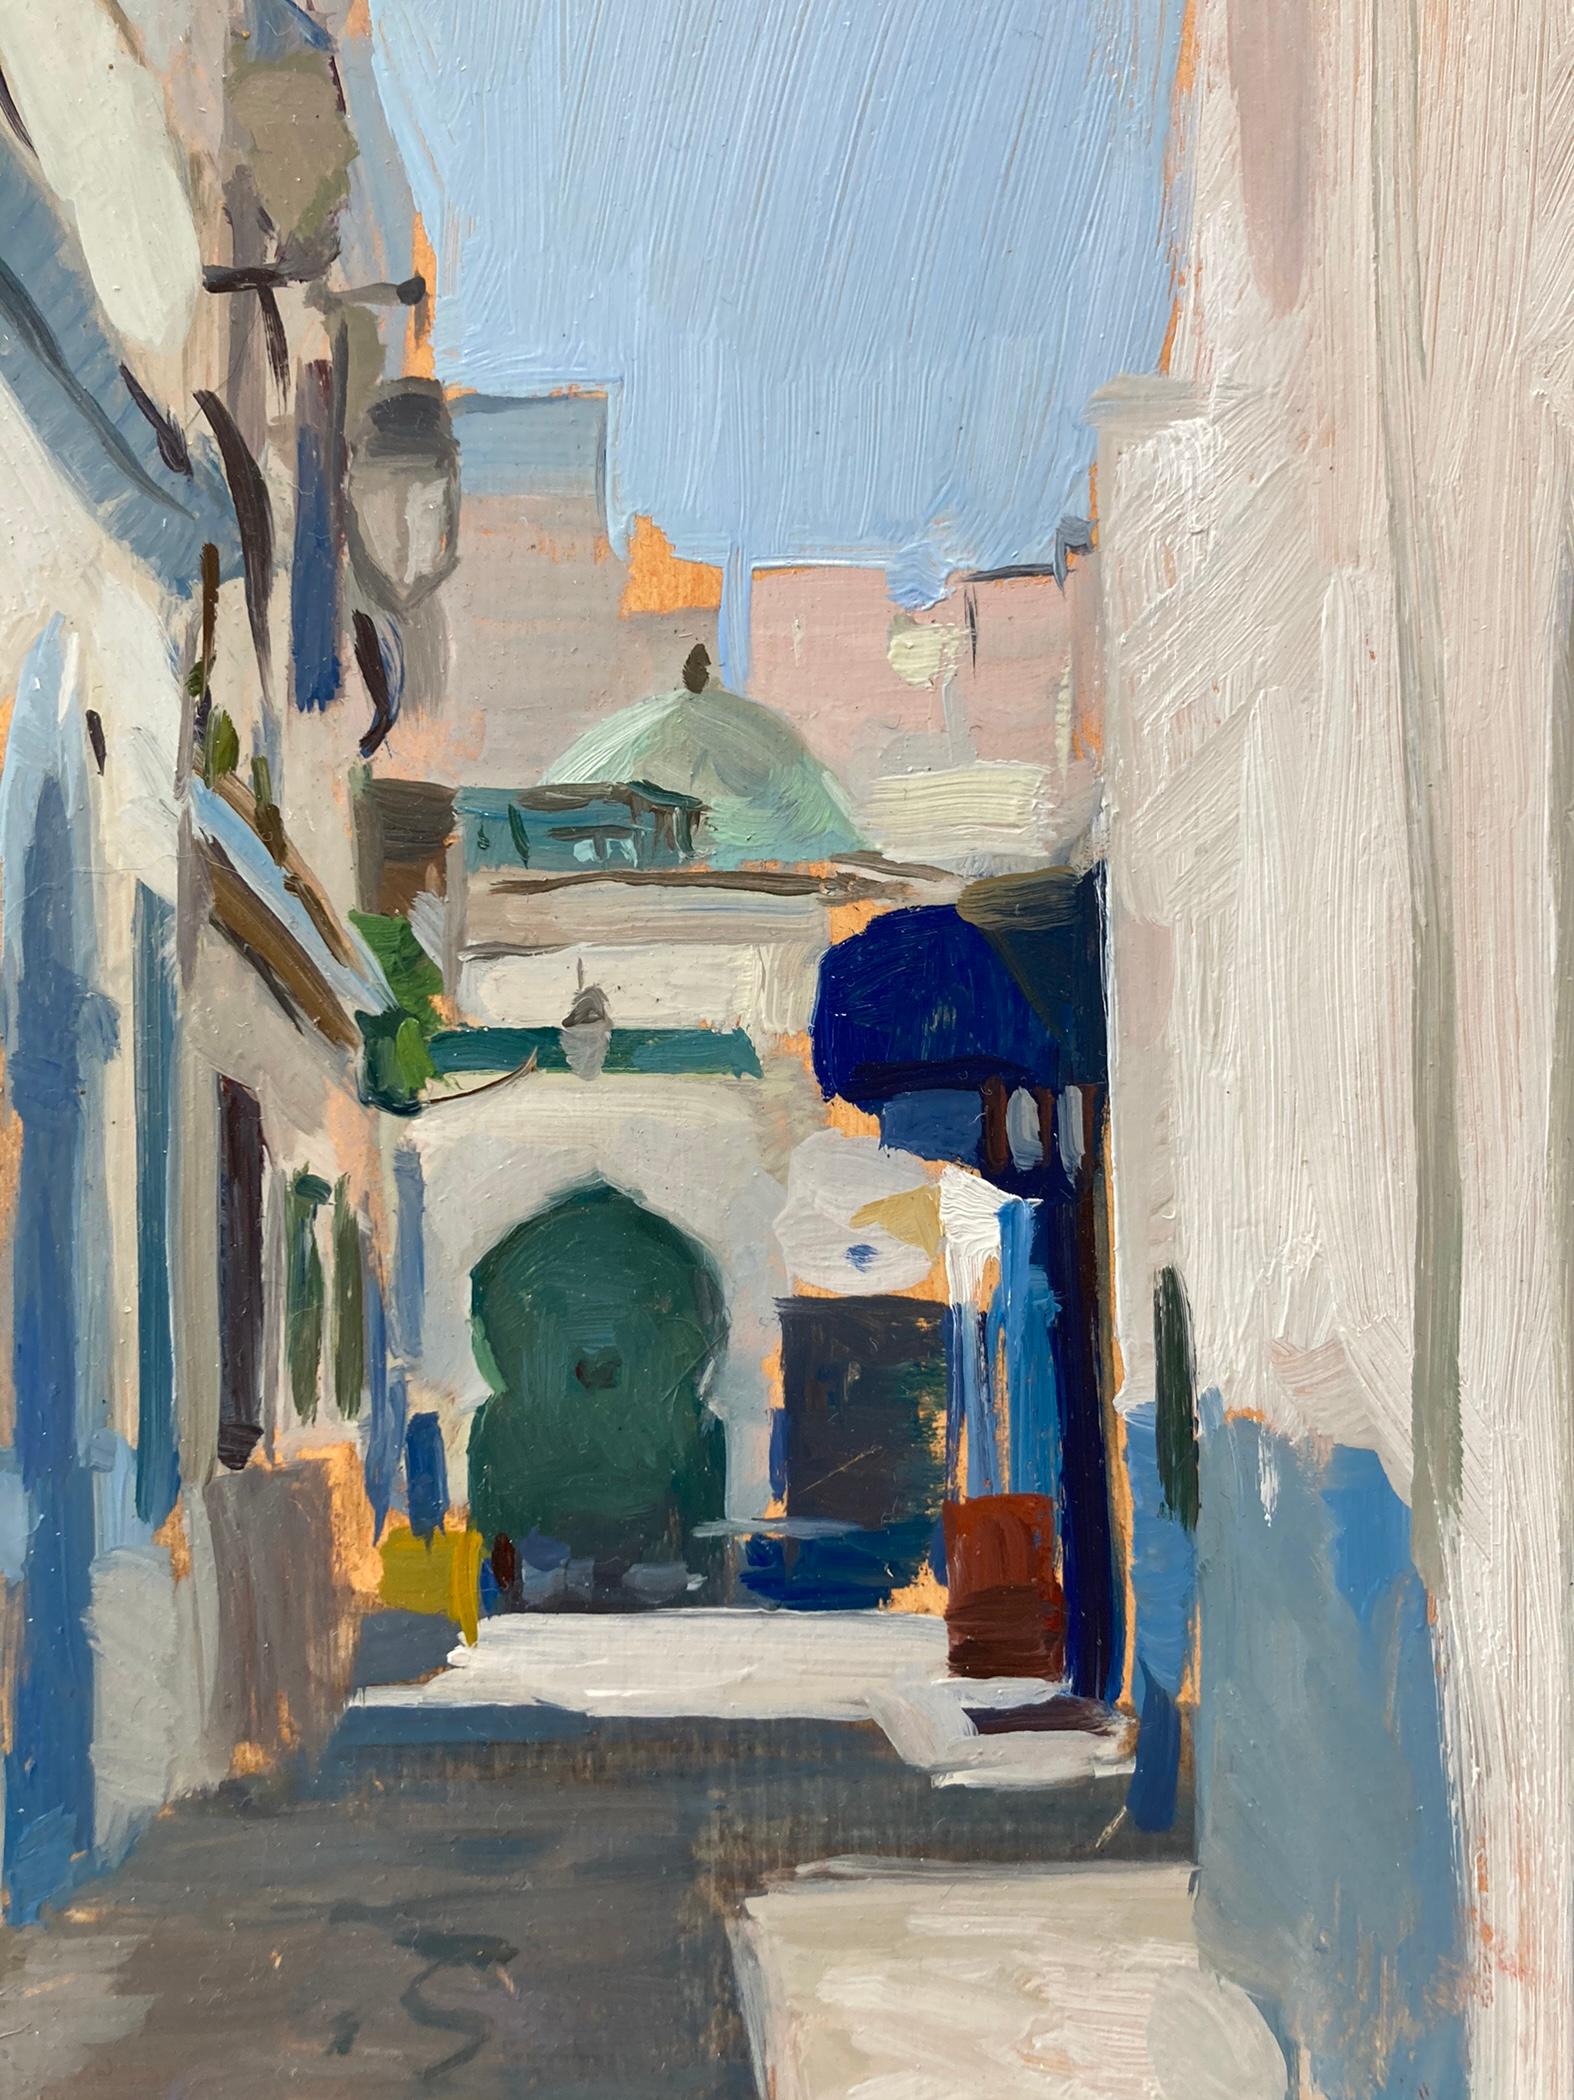 Dalessio depicts a corridored of Assilah, Morocco in this plein air painting. The paint on the buildings mirrors the color of the bright blue sky above. The style of the building at the end of the street gives away the painting's Morocco location.